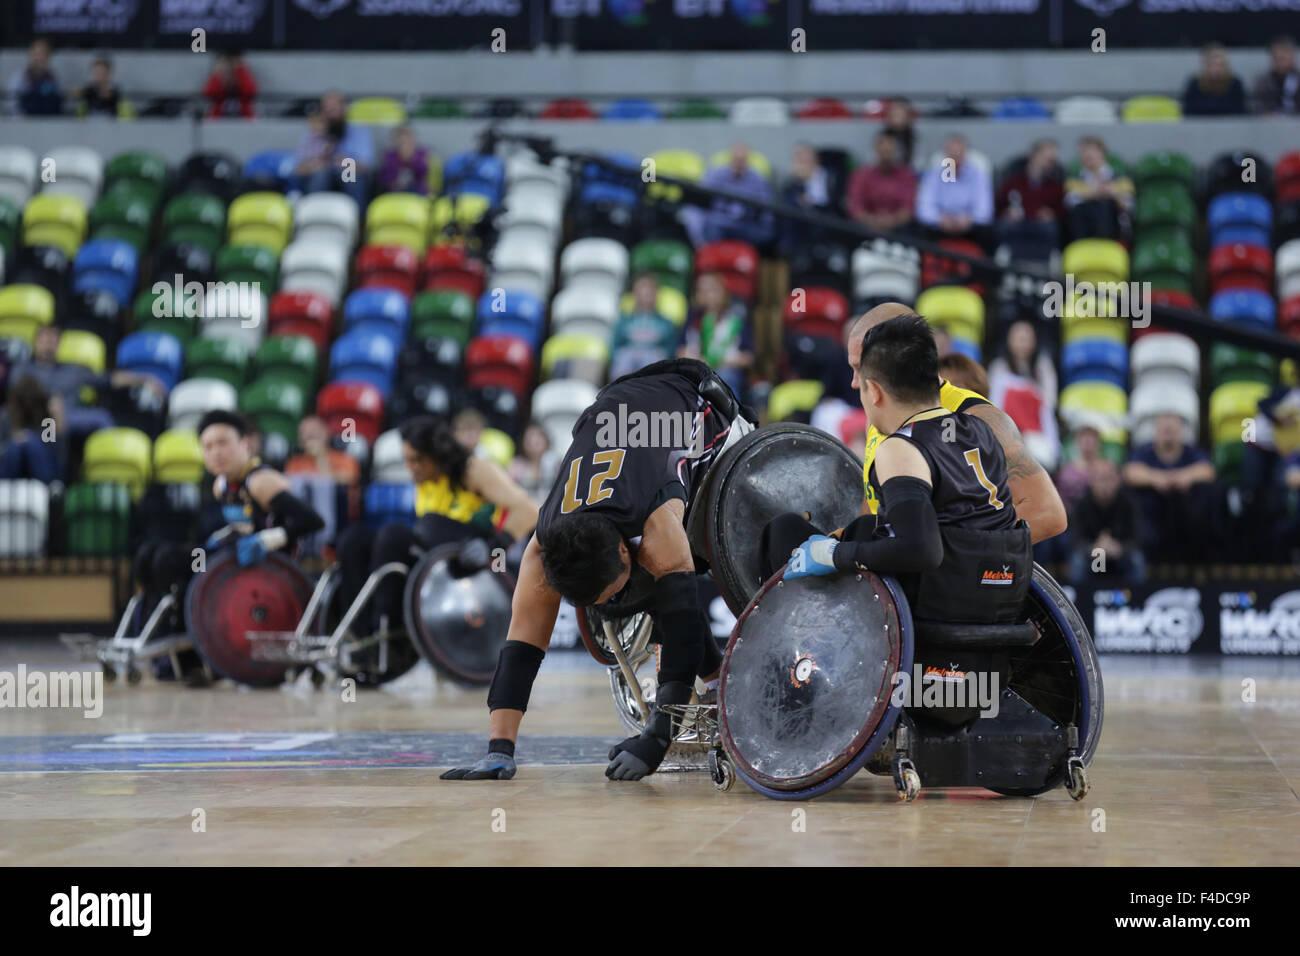 London, UK. 16th October, 2015. World Wheelchair Rugby Challenge Team Aus beat Japan 60-55 to win Bronze medal. Copperbox, Olympic Park, London, UK. Yukinobu takes a tumble. 16th October, 2015. copyright carol moir/Alamy Live News Stock Photo